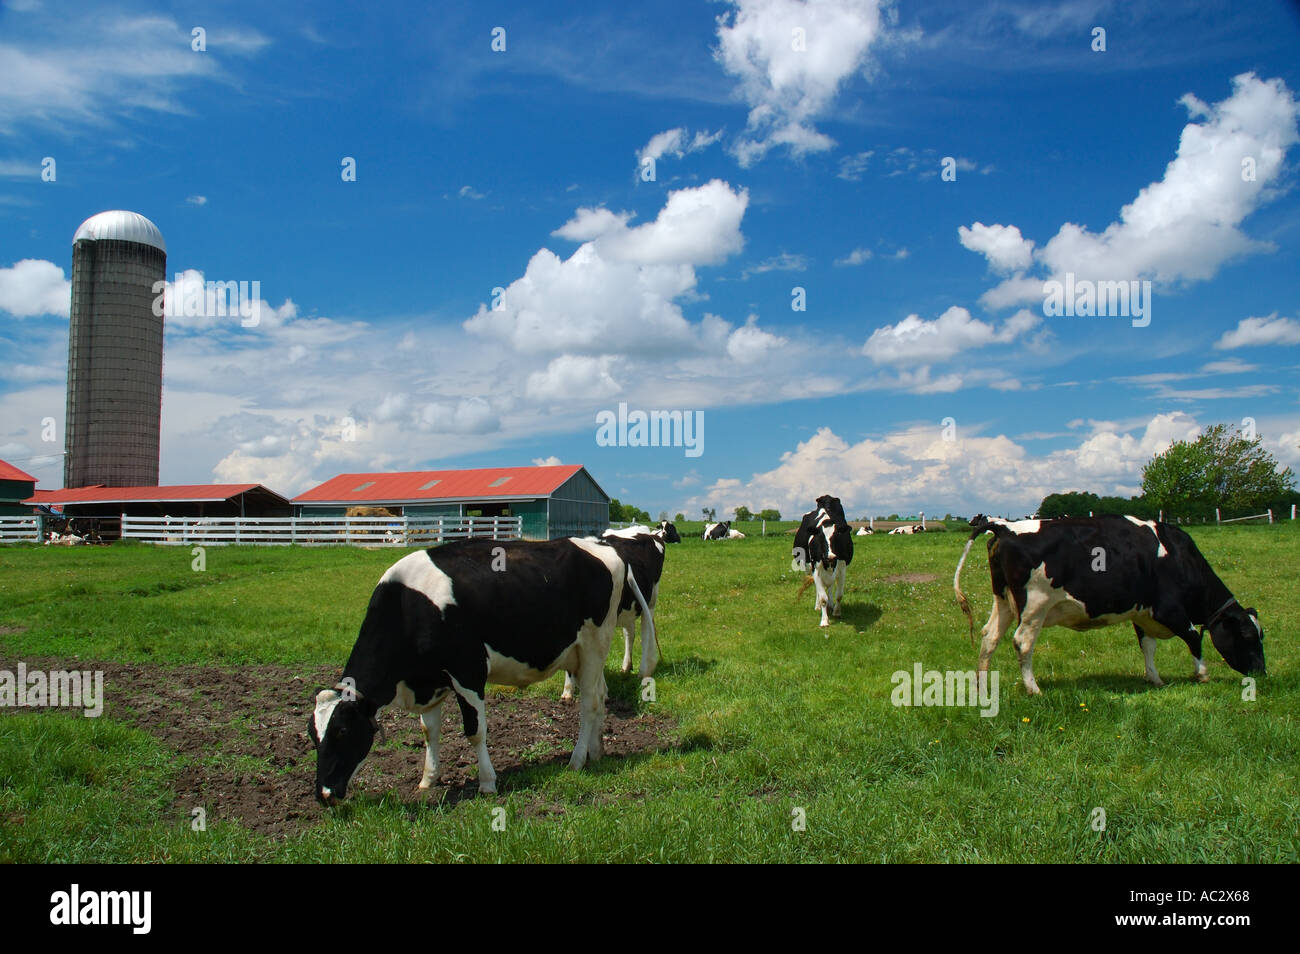 Holstein cows in a field with barn and silo Ontario Stock Photo